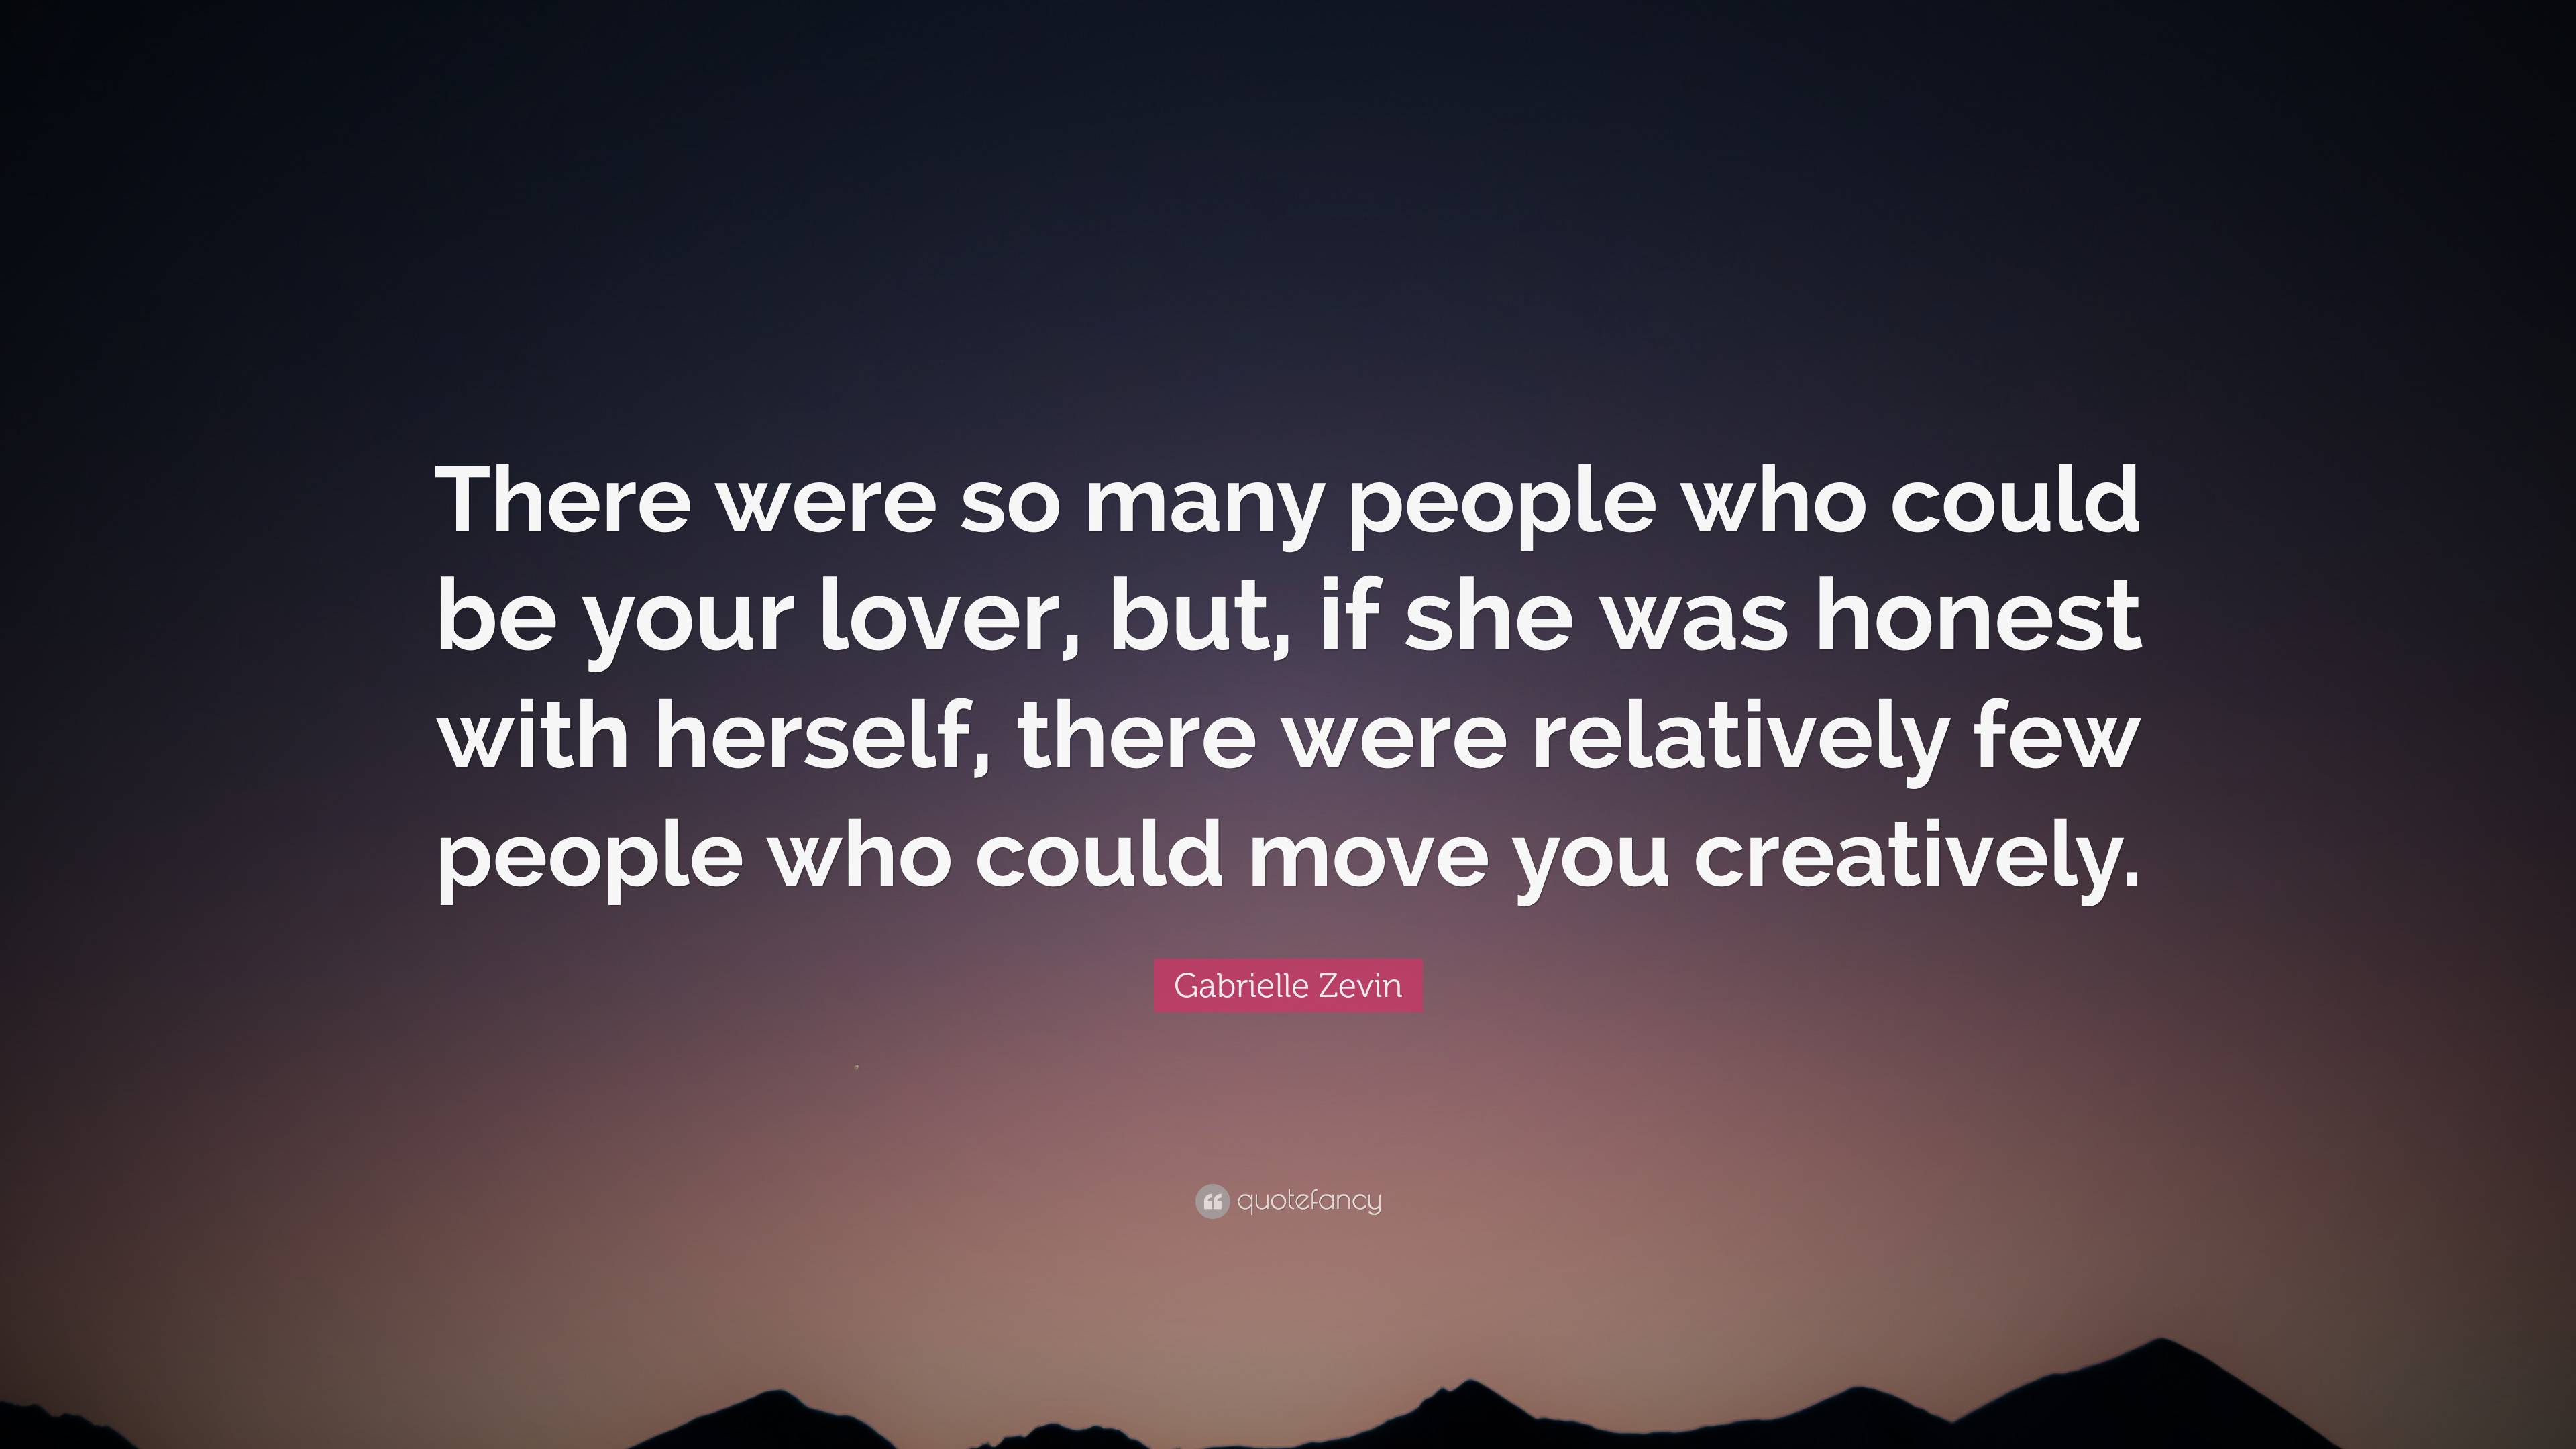 https://quotefancy.com/media/wallpaper/3840x2160/7333838-Gabrielle-Zevin-Quote-There-were-so-many-people-who-could-be-your.jpg